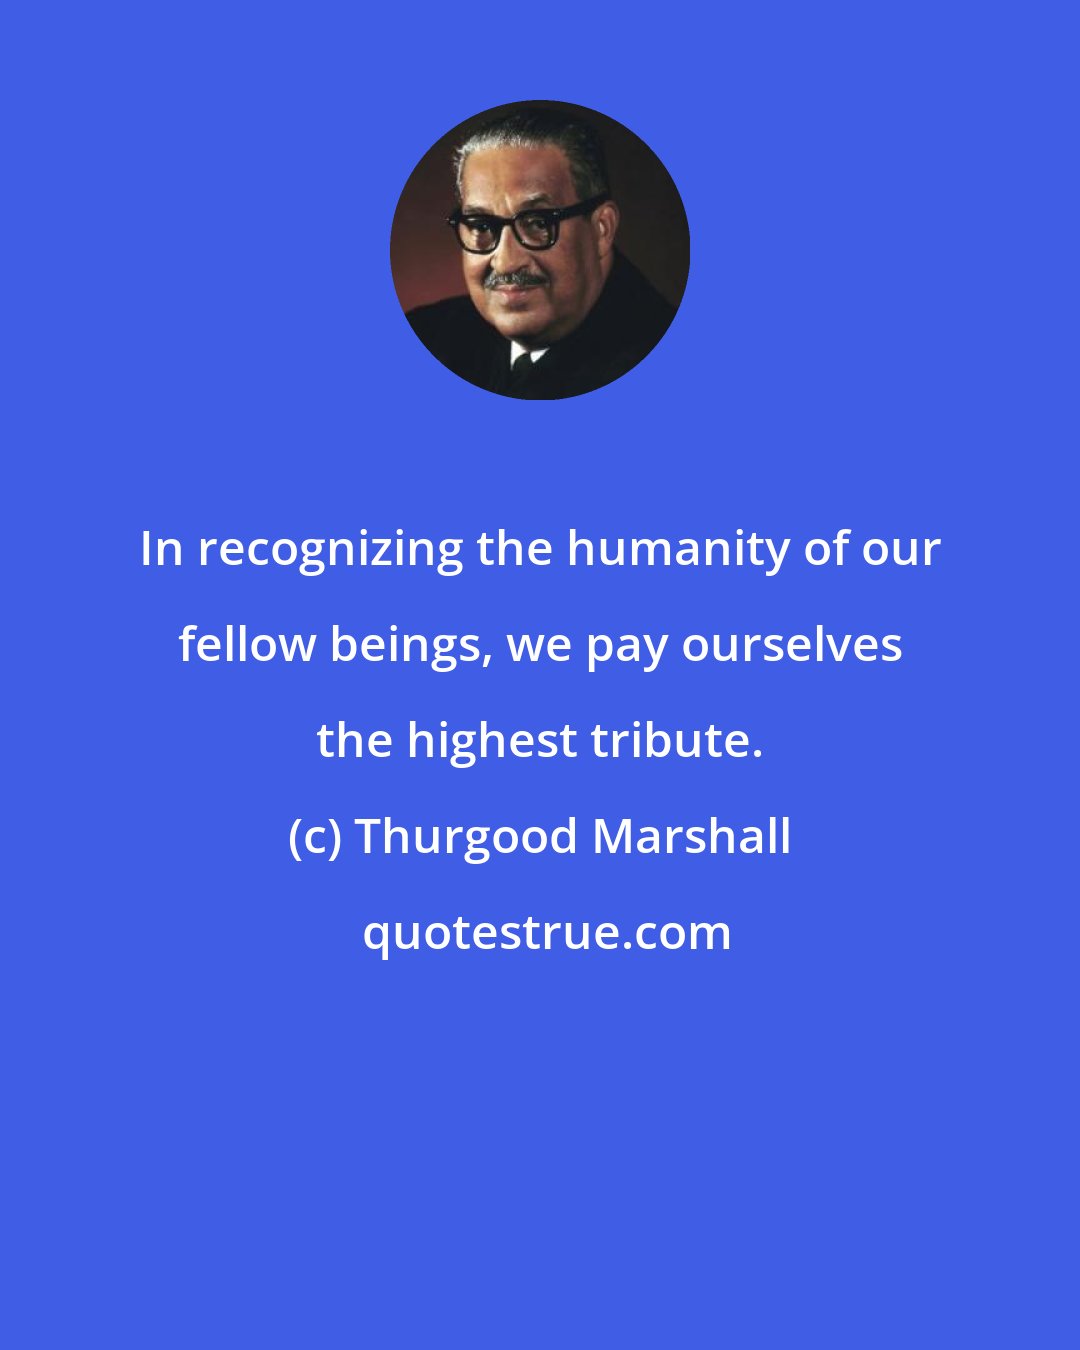 Thurgood Marshall: In recognizing the humanity of our fellow beings, we pay ourselves the highest tribute.